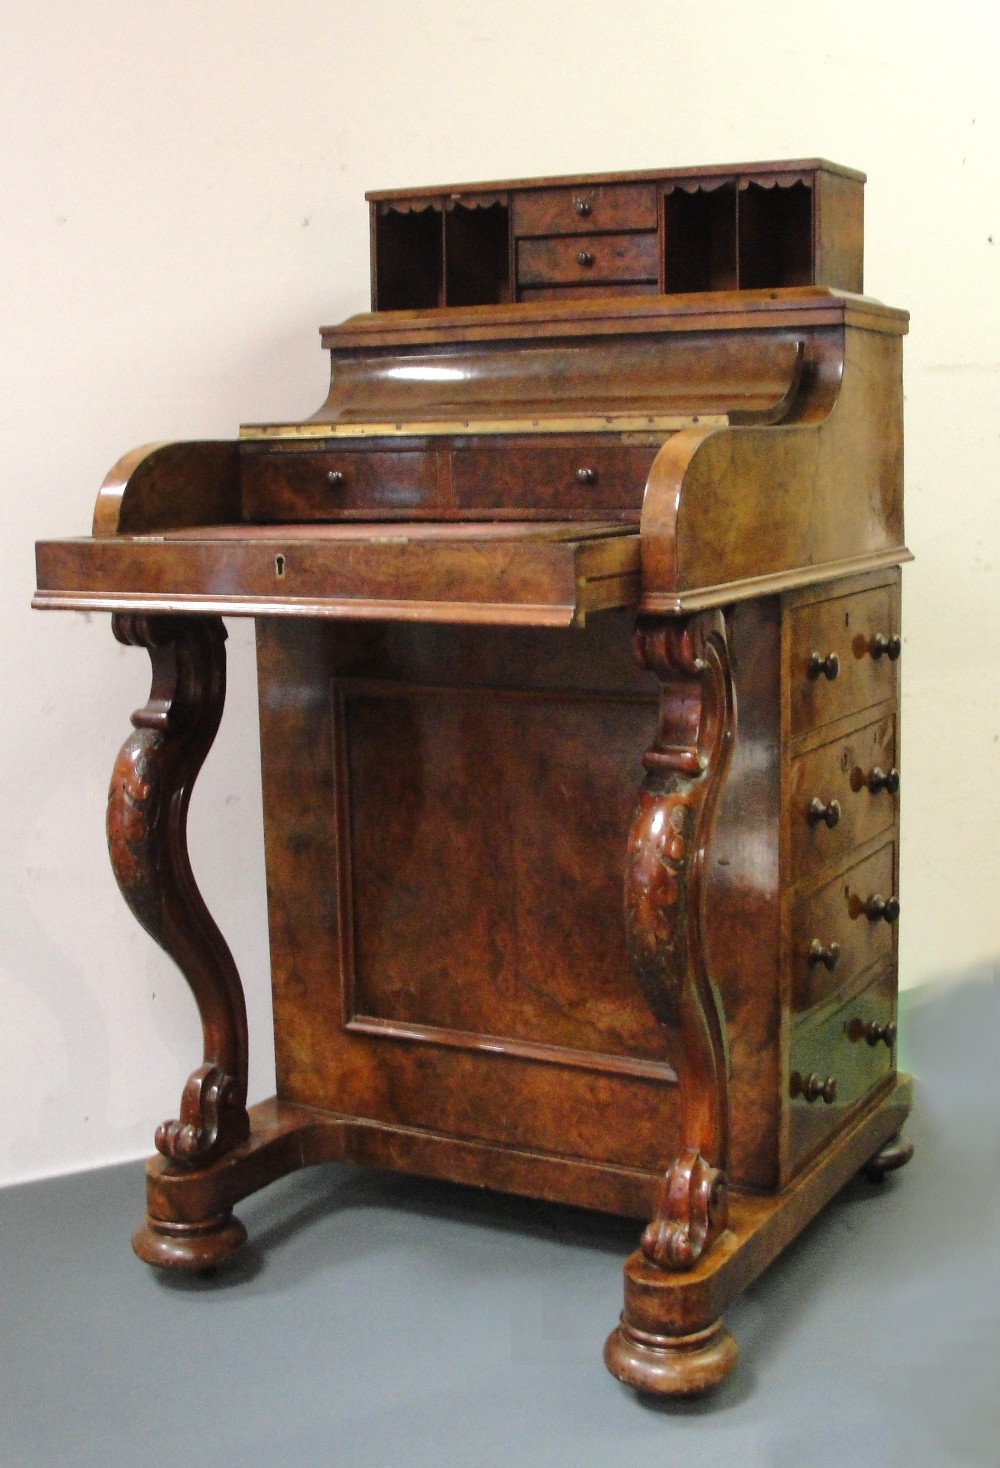 A Davenport:
19th century, walnut, the top with a lifting drawer and pigeon hole arrangement, the